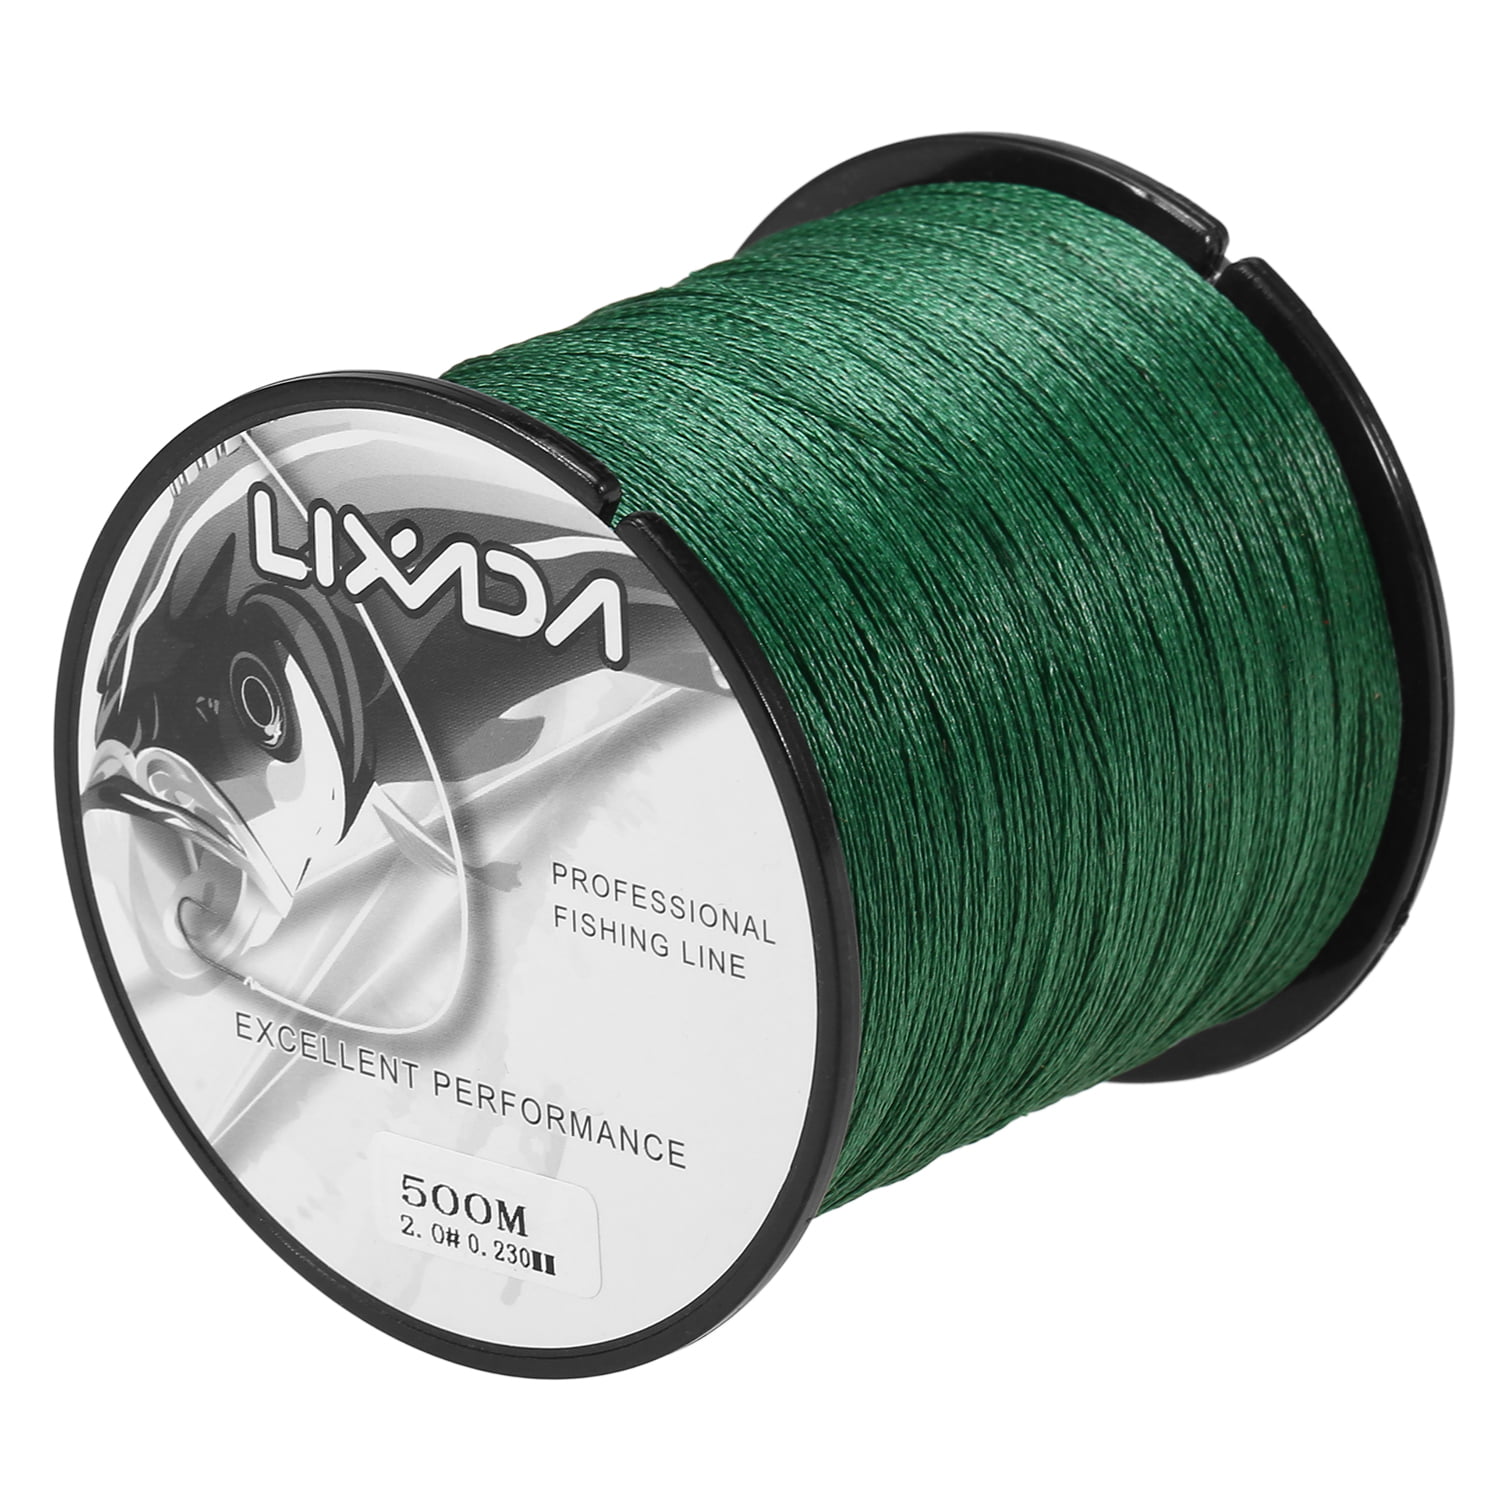 500M 80LB Super Strong 4 Strand Pro PE Power Braided Fishing Line 500 YD NEW! 